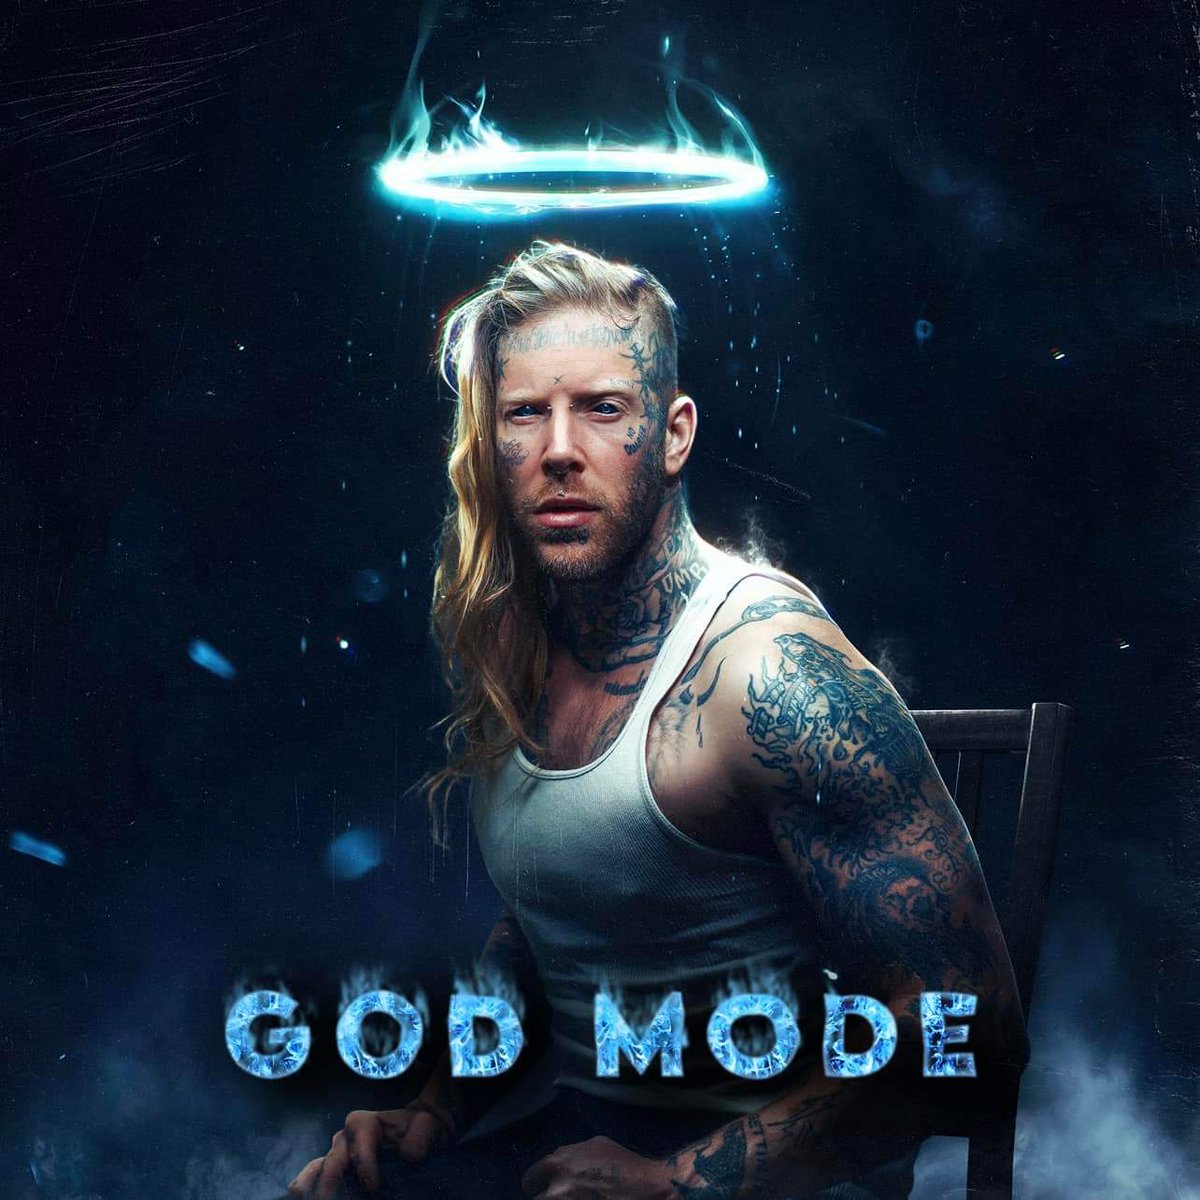 OMG, WTF!!!!!!! THIS IS JUST INSANE. TOM IS TOPPED THE LEVELS THAT ARE ACHIEVABLE. HE IS INDEED IN GOD MODE!!!!!! IF YOU HAVEN'T ALREADY, CHECK OUT 'GOD MODE' IT WILL BLOW YOUR MINDS!!!!!!! #TOMMACDONALD #GODMODE #HOG4LIFE #HOG4EVER #HOGFAM4EVER #HOGFAM #HOG #HANGOVERGANG